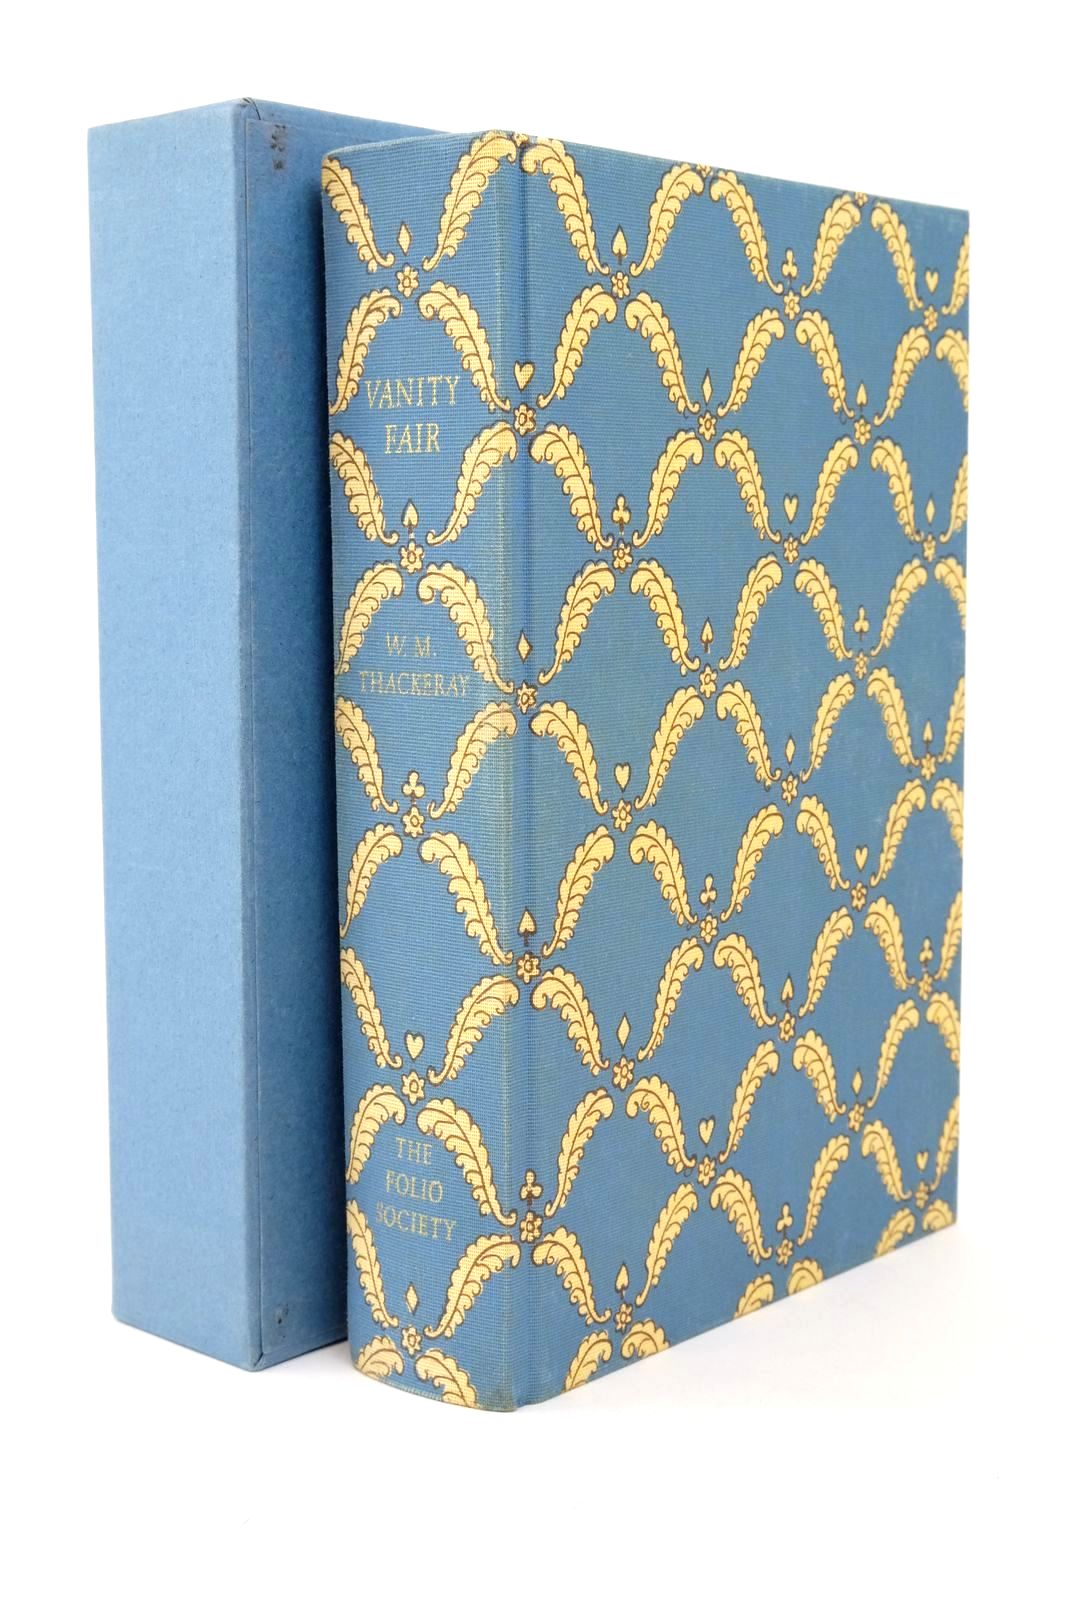 Photo of VANITY FAIR written by Thackeray, William Makepeace Weldon, Fay illustrated by Pym, Roland published by Folio Society (STOCK CODE: 1322512)  for sale by Stella & Rose's Books